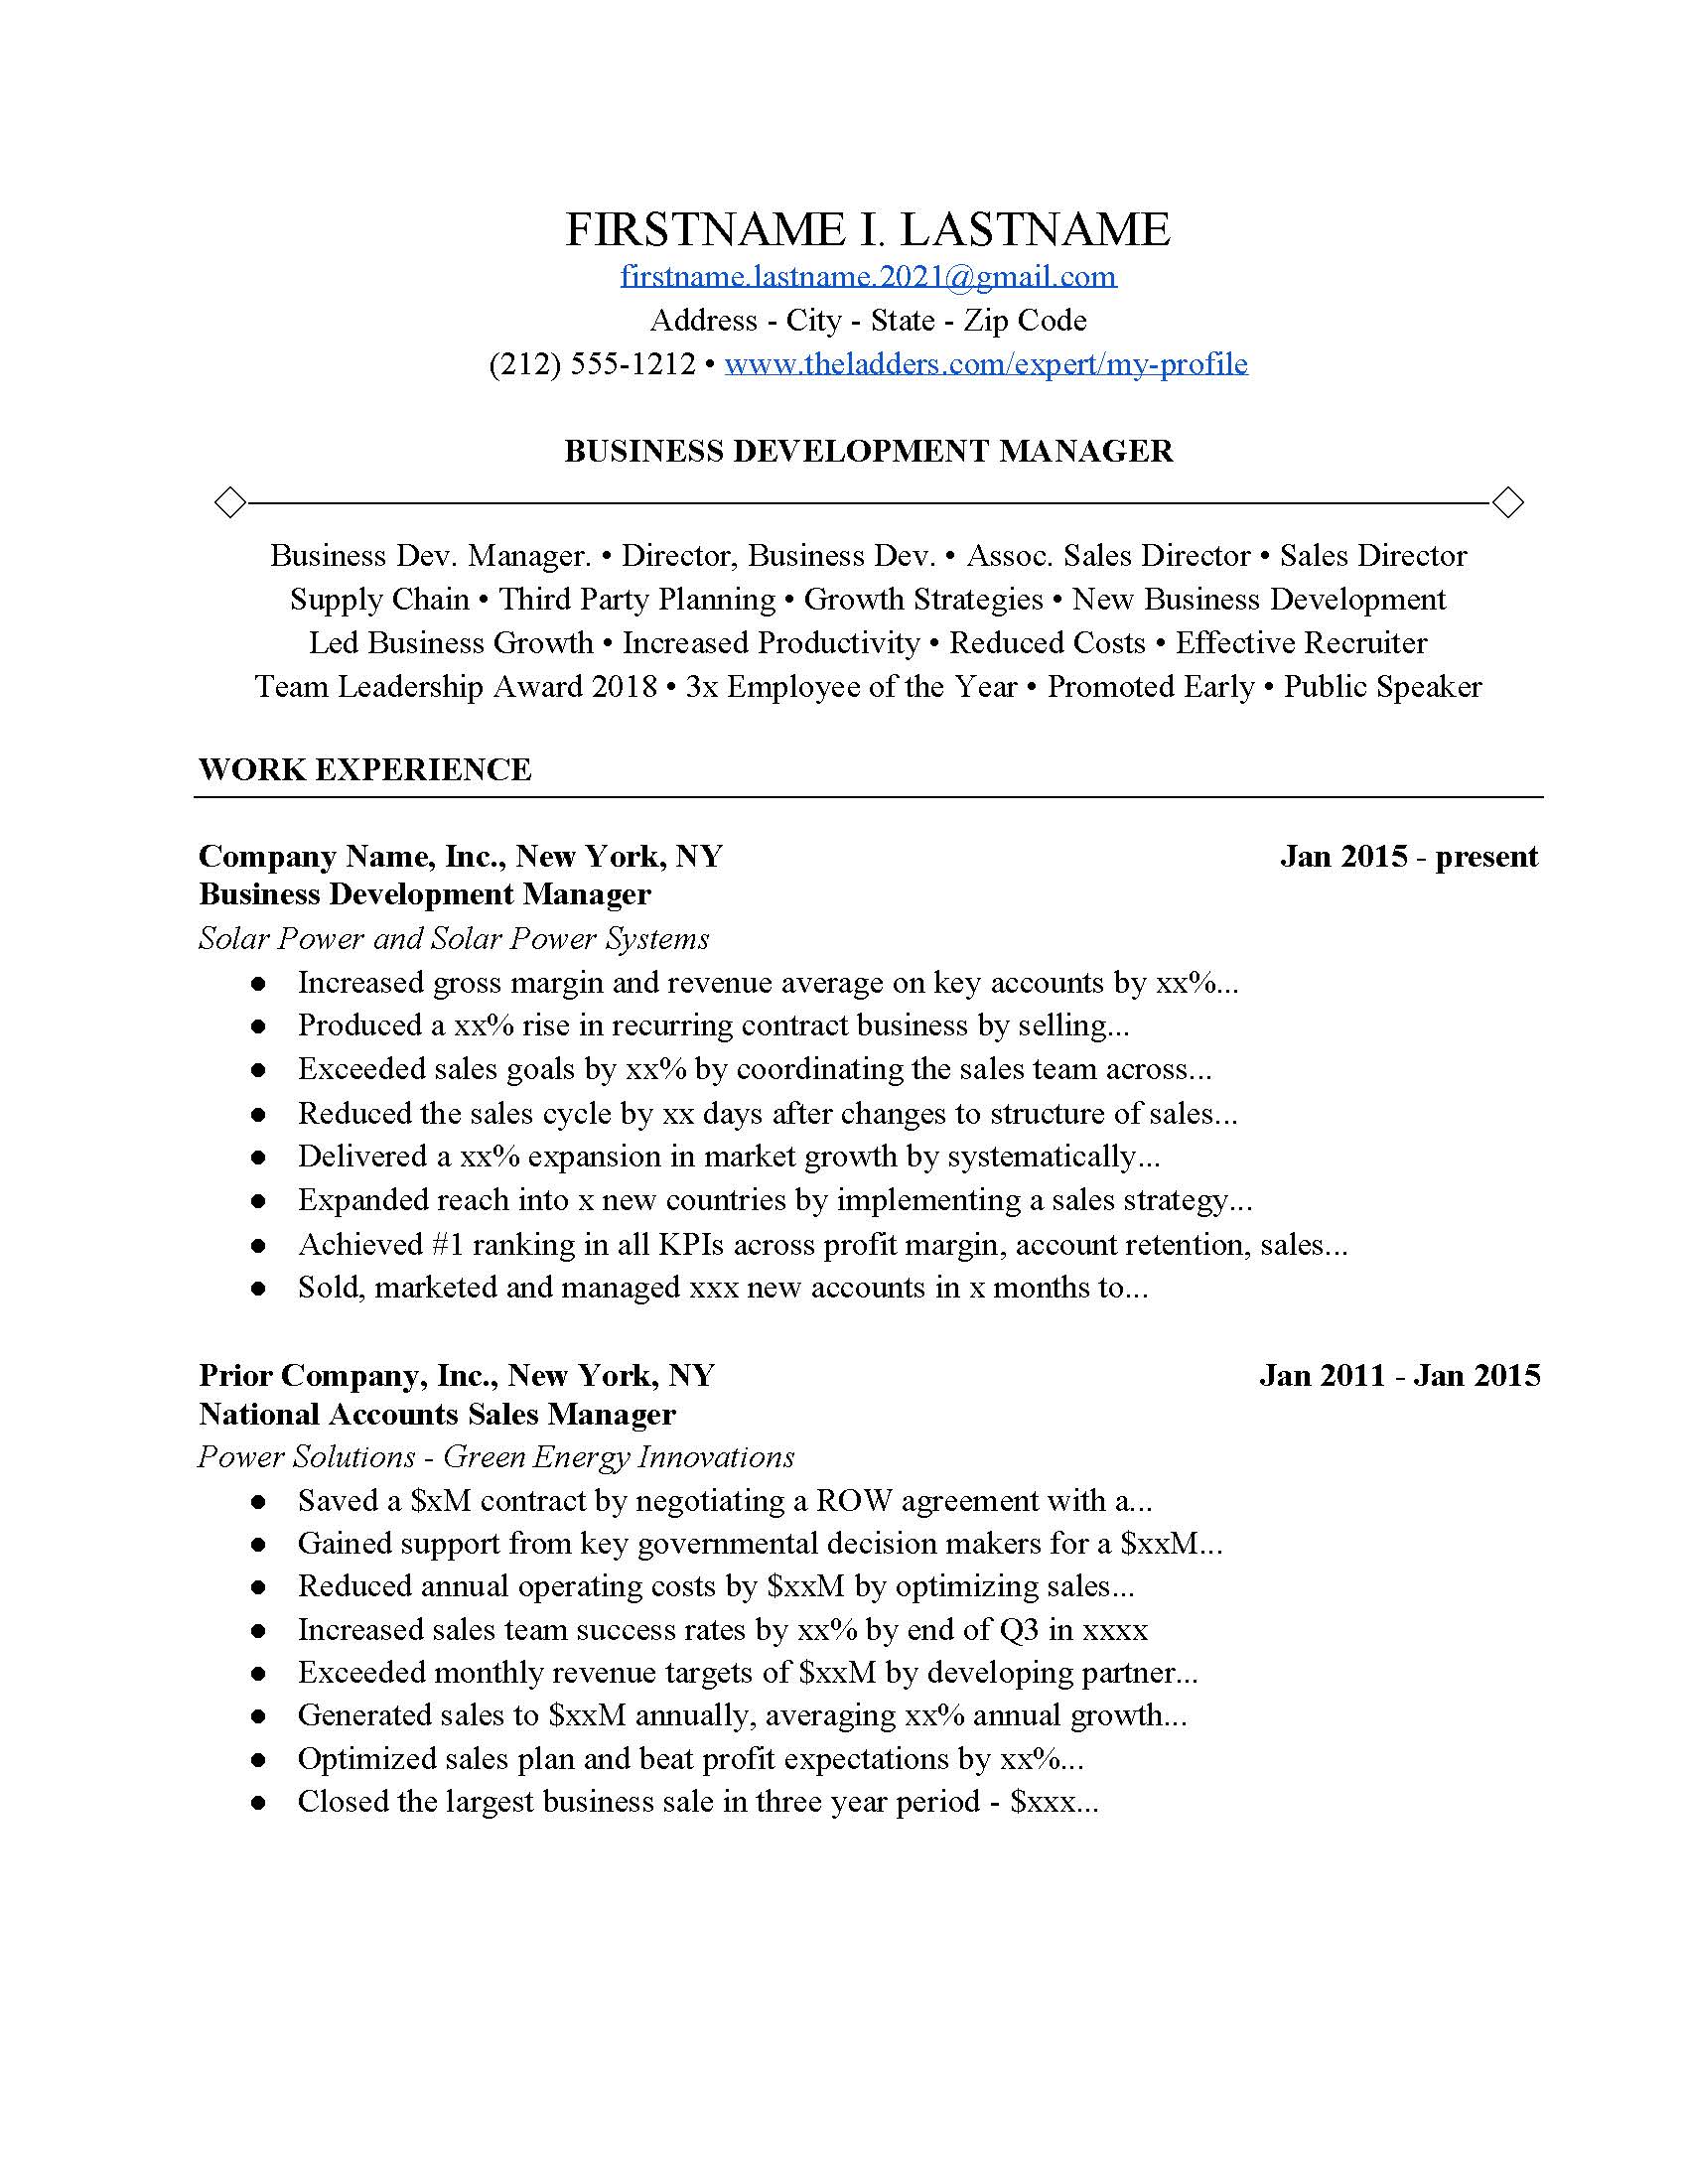 Business Development Resume and Cover Letter Example > Business Development Resume and Cover Letter Example .Docx (Word)